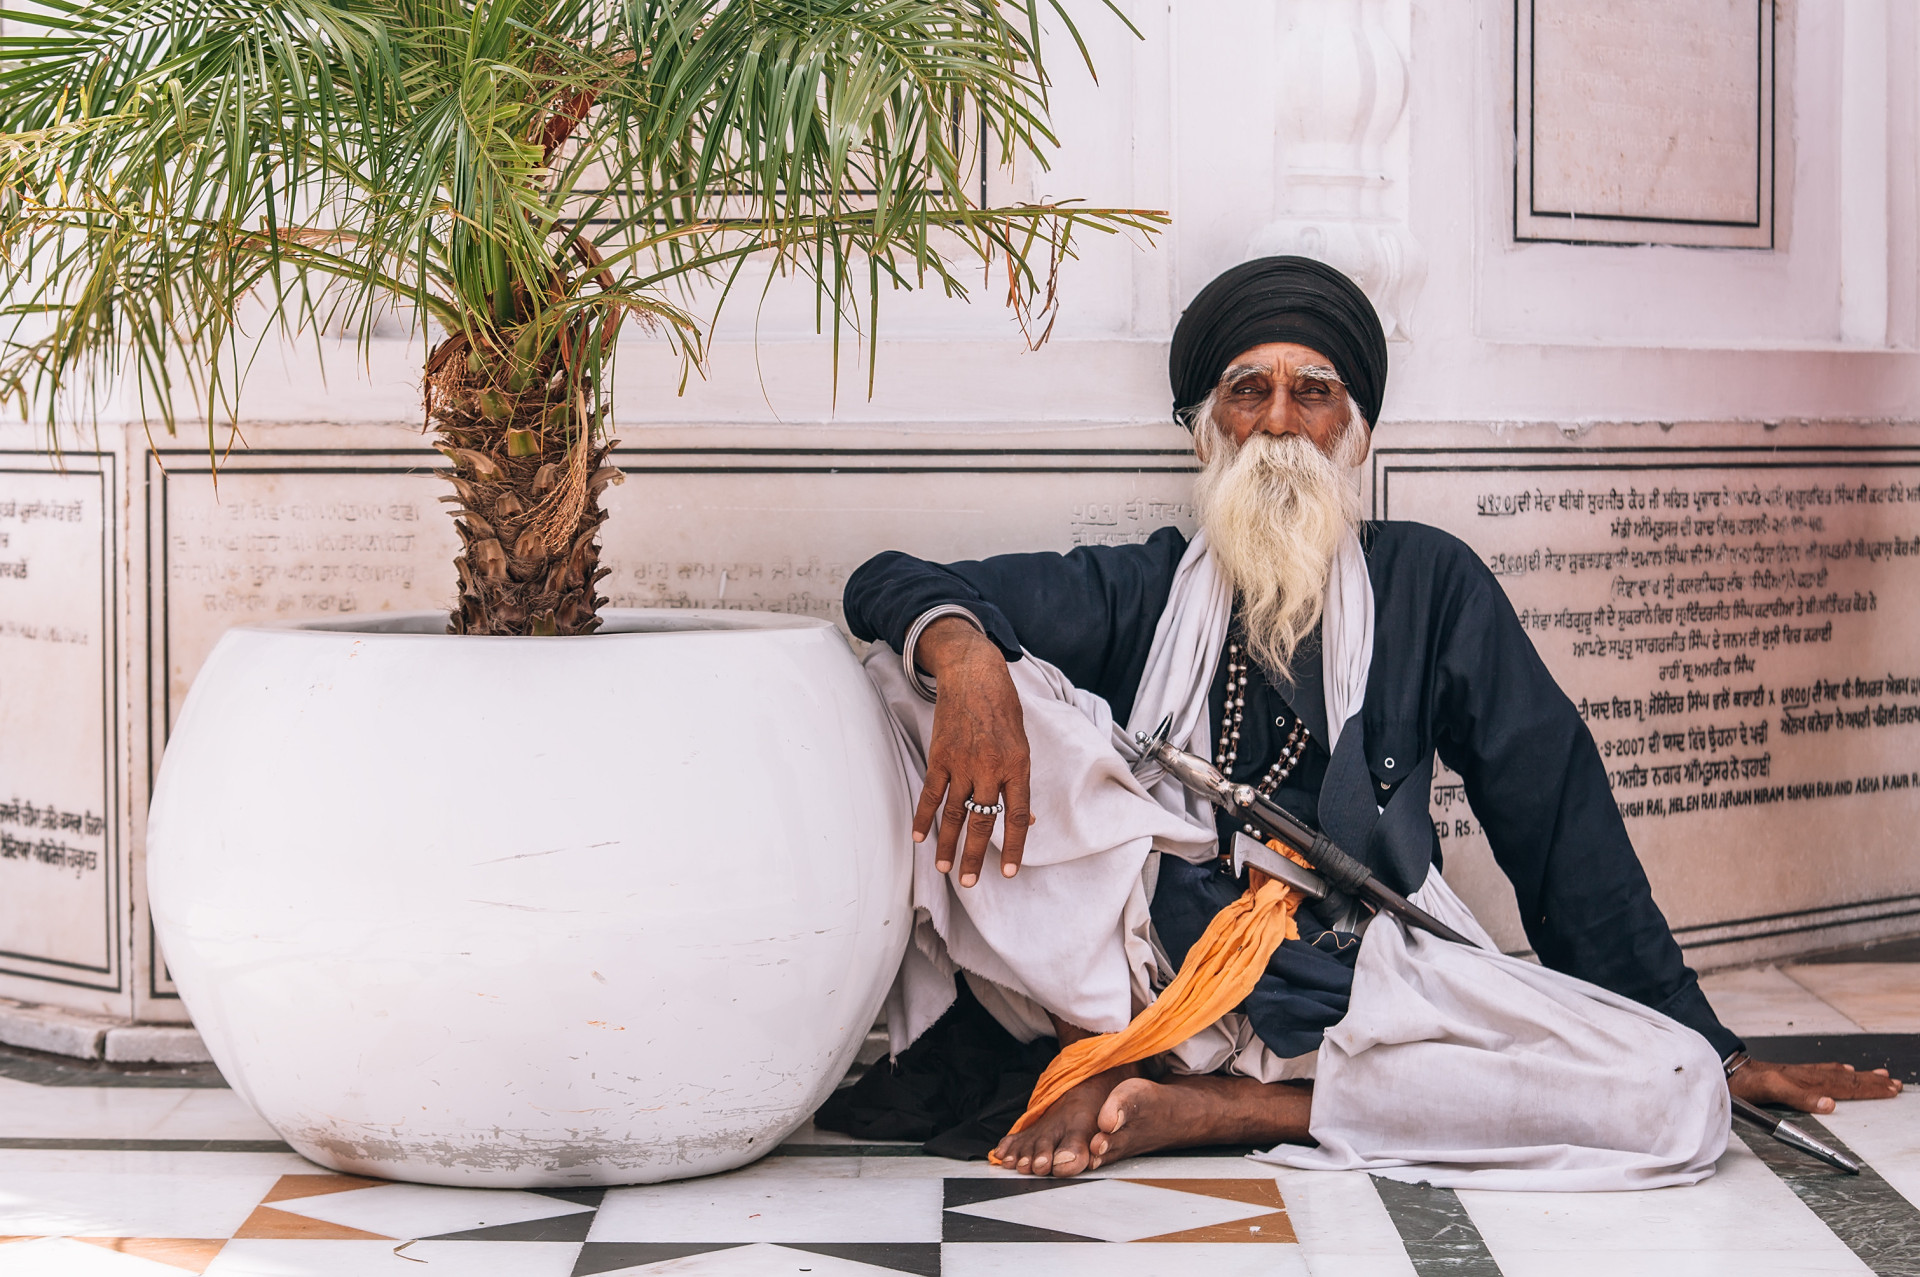 Sikhism was founded in the 15th century by Baba Nanak. The practice contains elements of Islam and Hinduism. Sikh men are known for their long beards and for wearing turbans.<p>You may also like:<a href="https://www.starsinsider.com/n/326873?utm_source=msn.com&utm_medium=display&utm_campaign=referral_description&utm_content=128096en-in"> Body parts that you can live without</a></p>